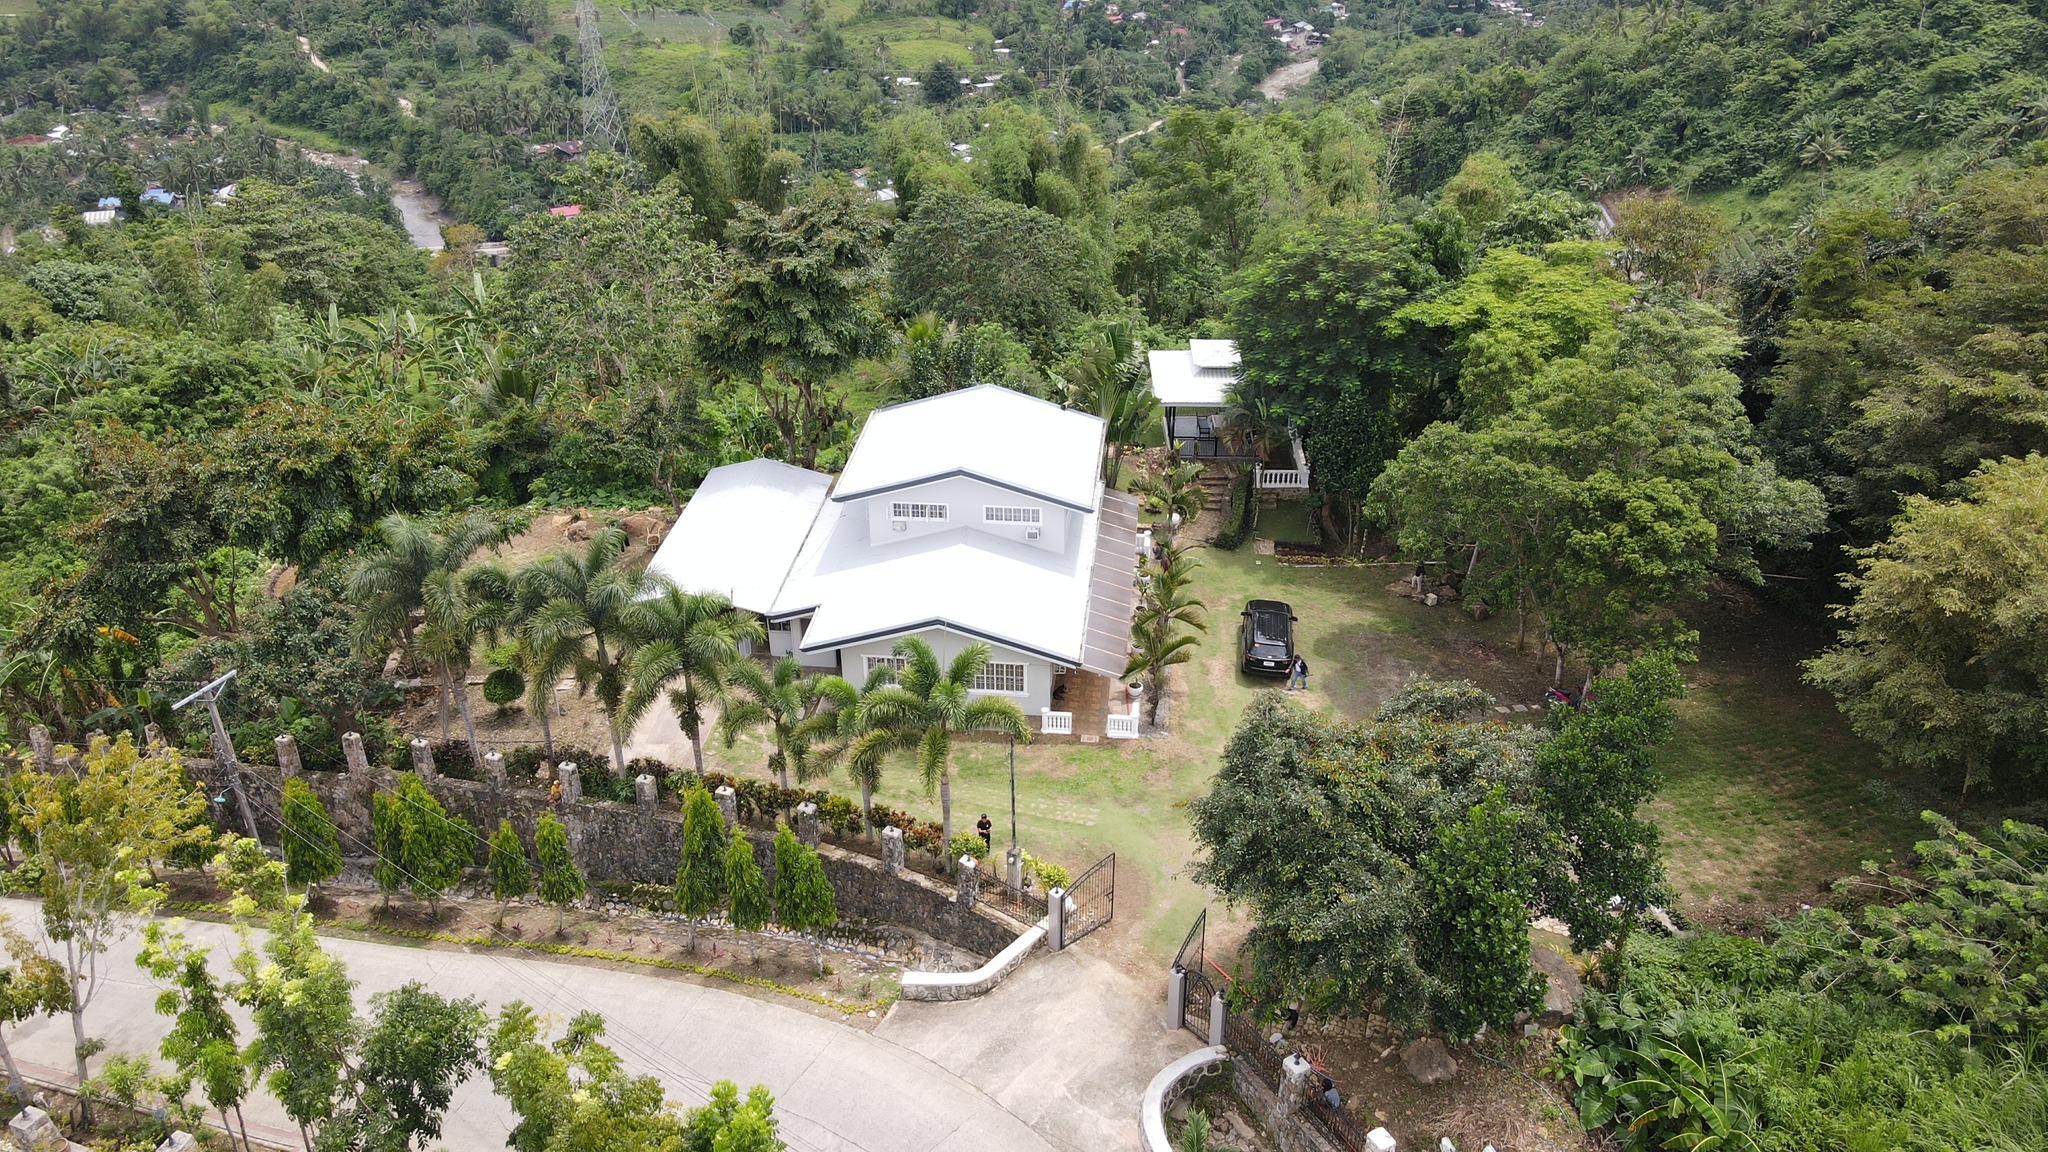 Bonbon Cebu Lot for SALE – Overlooking lot with spring